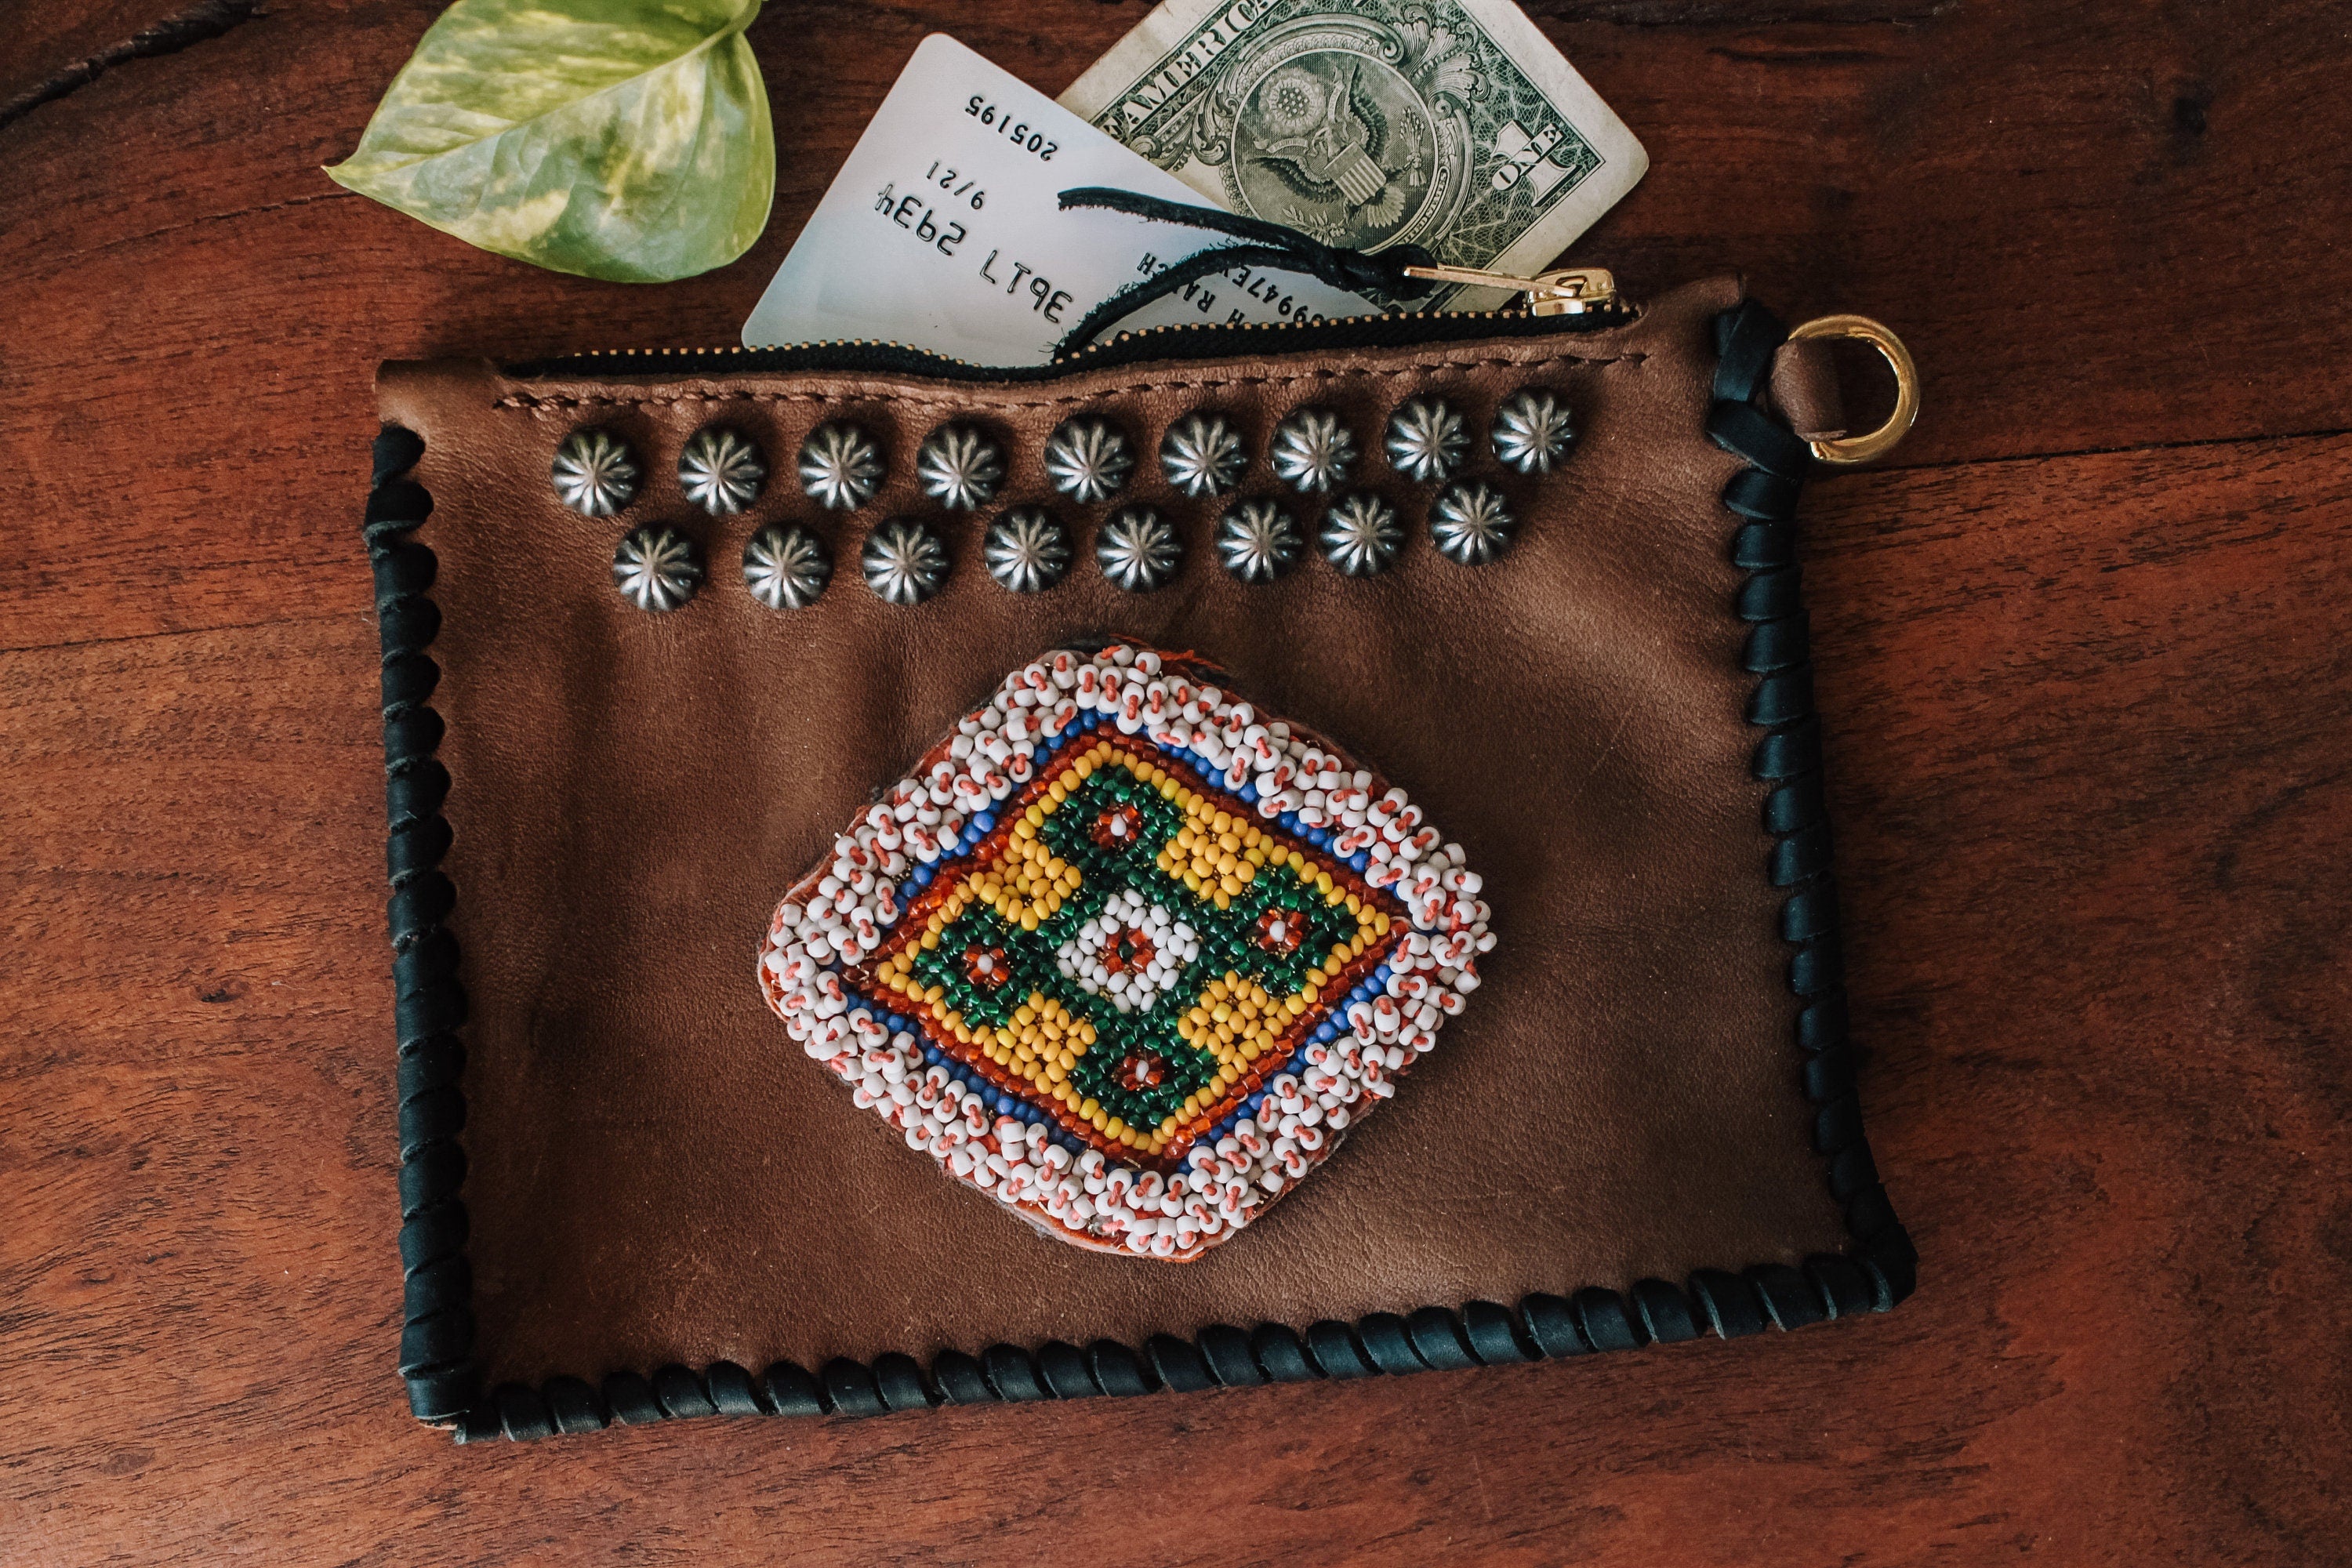 Jeff Bridgman Antique Flags and Painted Furniture - NATIVE AMERICAN BEADED  COIN PURSE WITH A FOLKY PATRIOTIC SHIELD ON THE OBVERSE AND A GEOMETRIC  REPRESENTATION OF AN ANIMAL ON THE REVERSE, CA